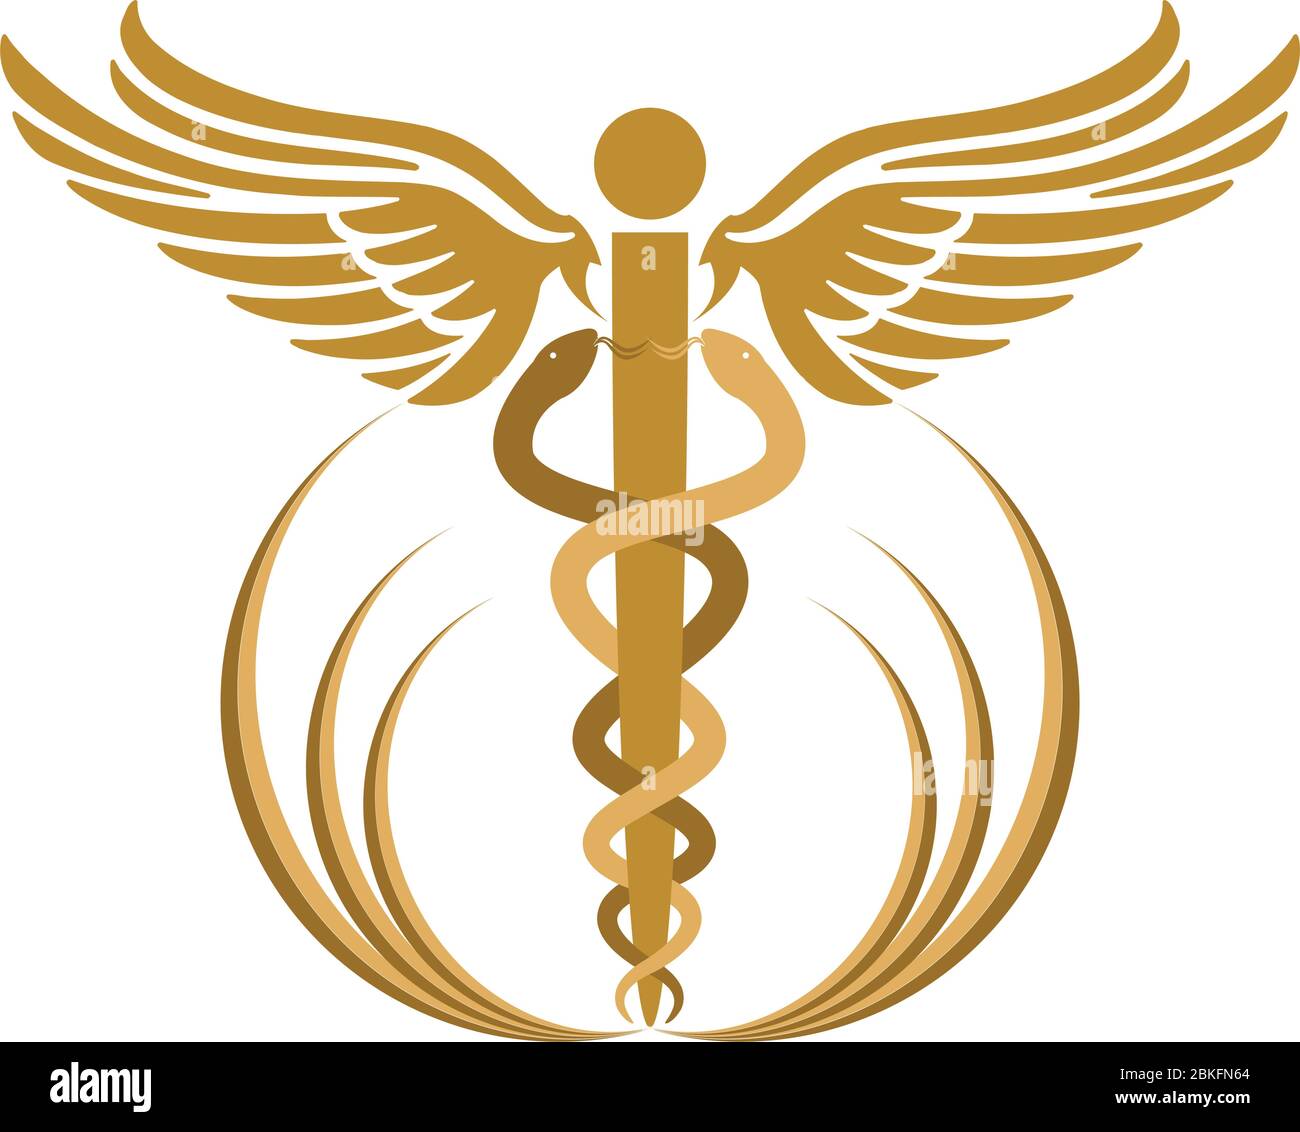 Illustration art of a caduceus logo with isolated background Stock Vector